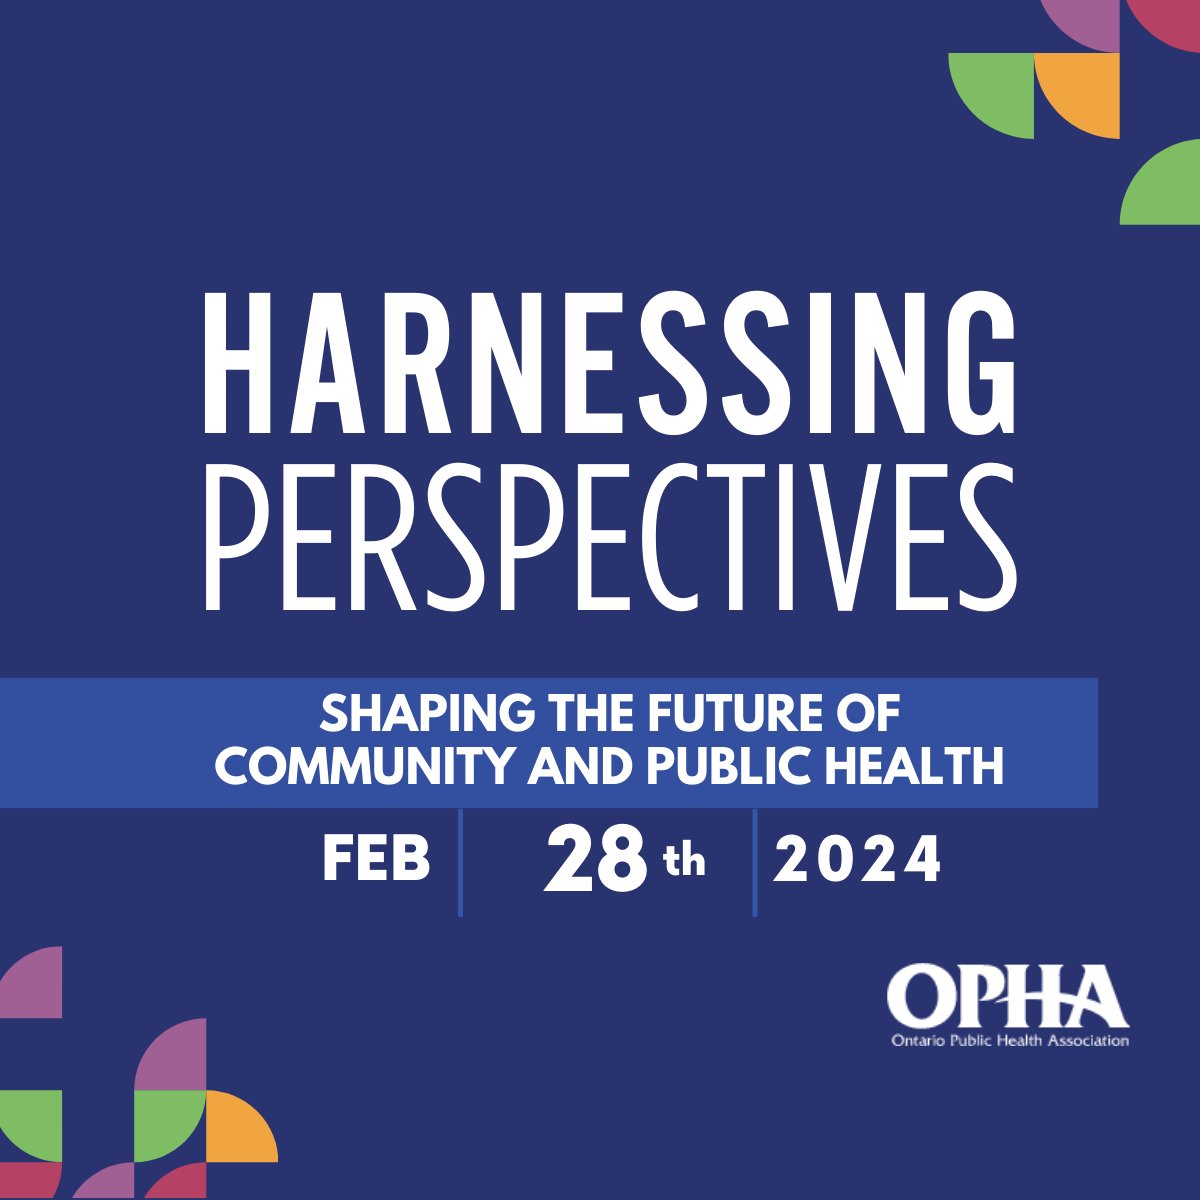 Register TODAY for our February Forum!! We have an exciting lineup - join the conversation!  Please share!
site.pheedloop.com/event/ophaff20…
#HarnessingPerspectives  #OPHA